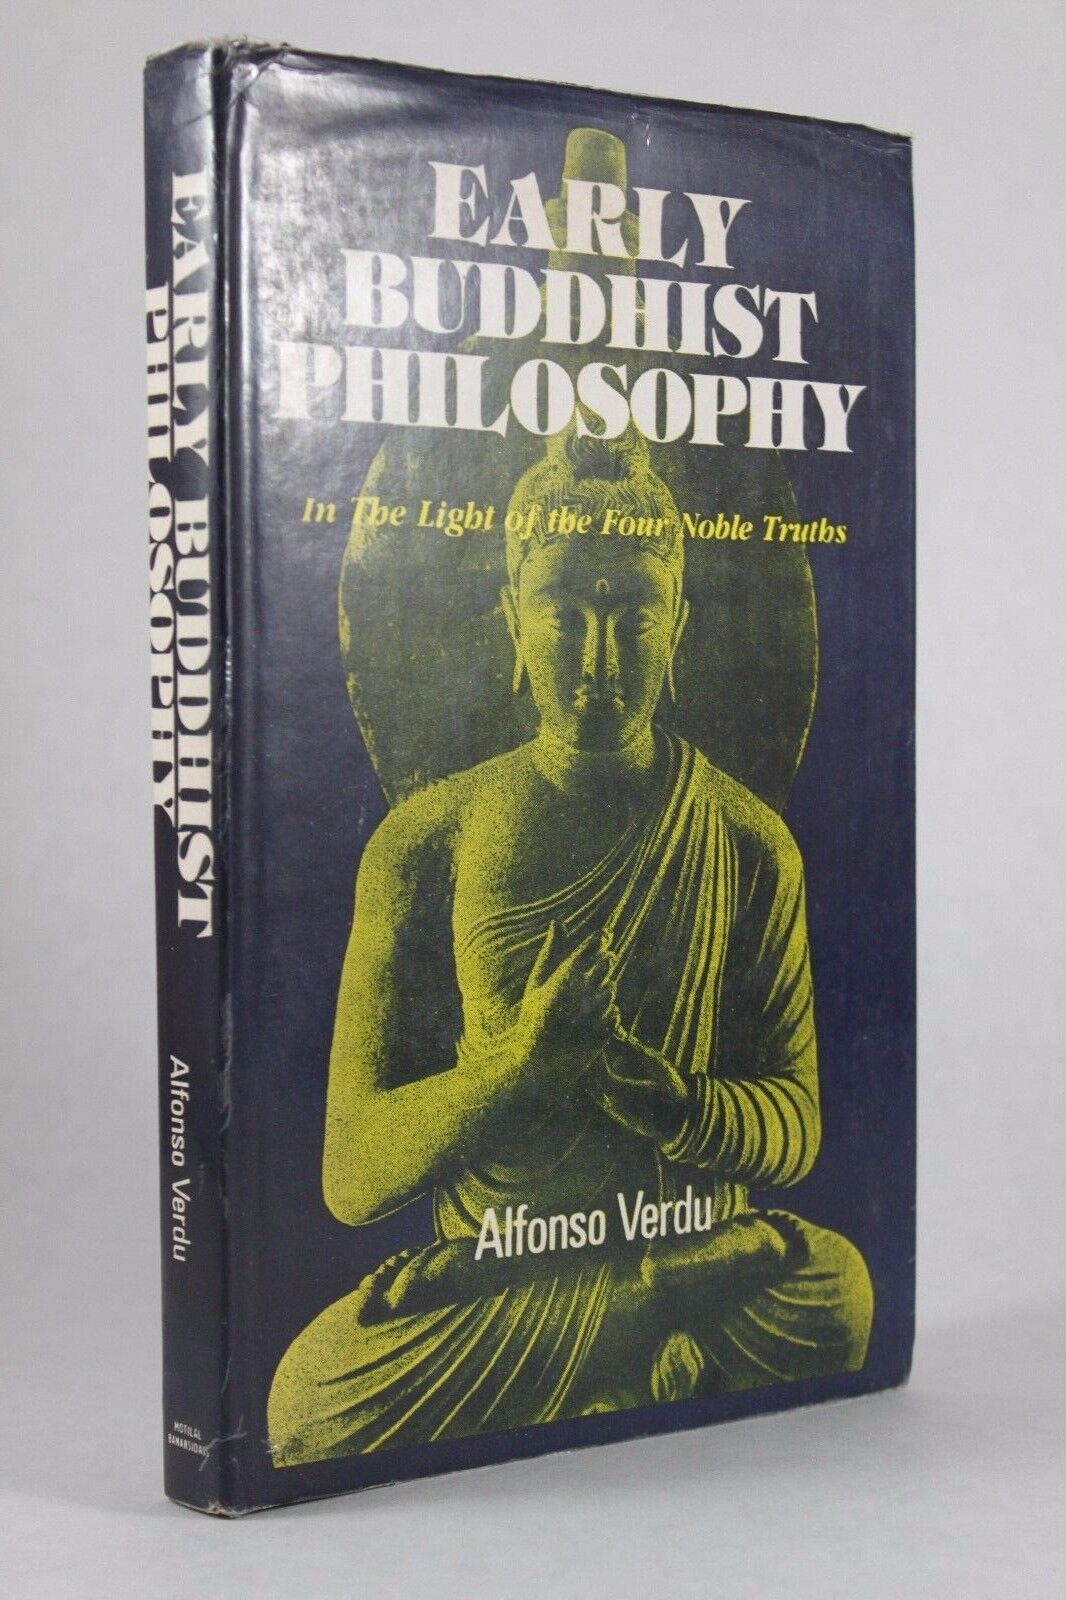 Early buddhist philosophy in the light of the four noble truths by alfonso verdu